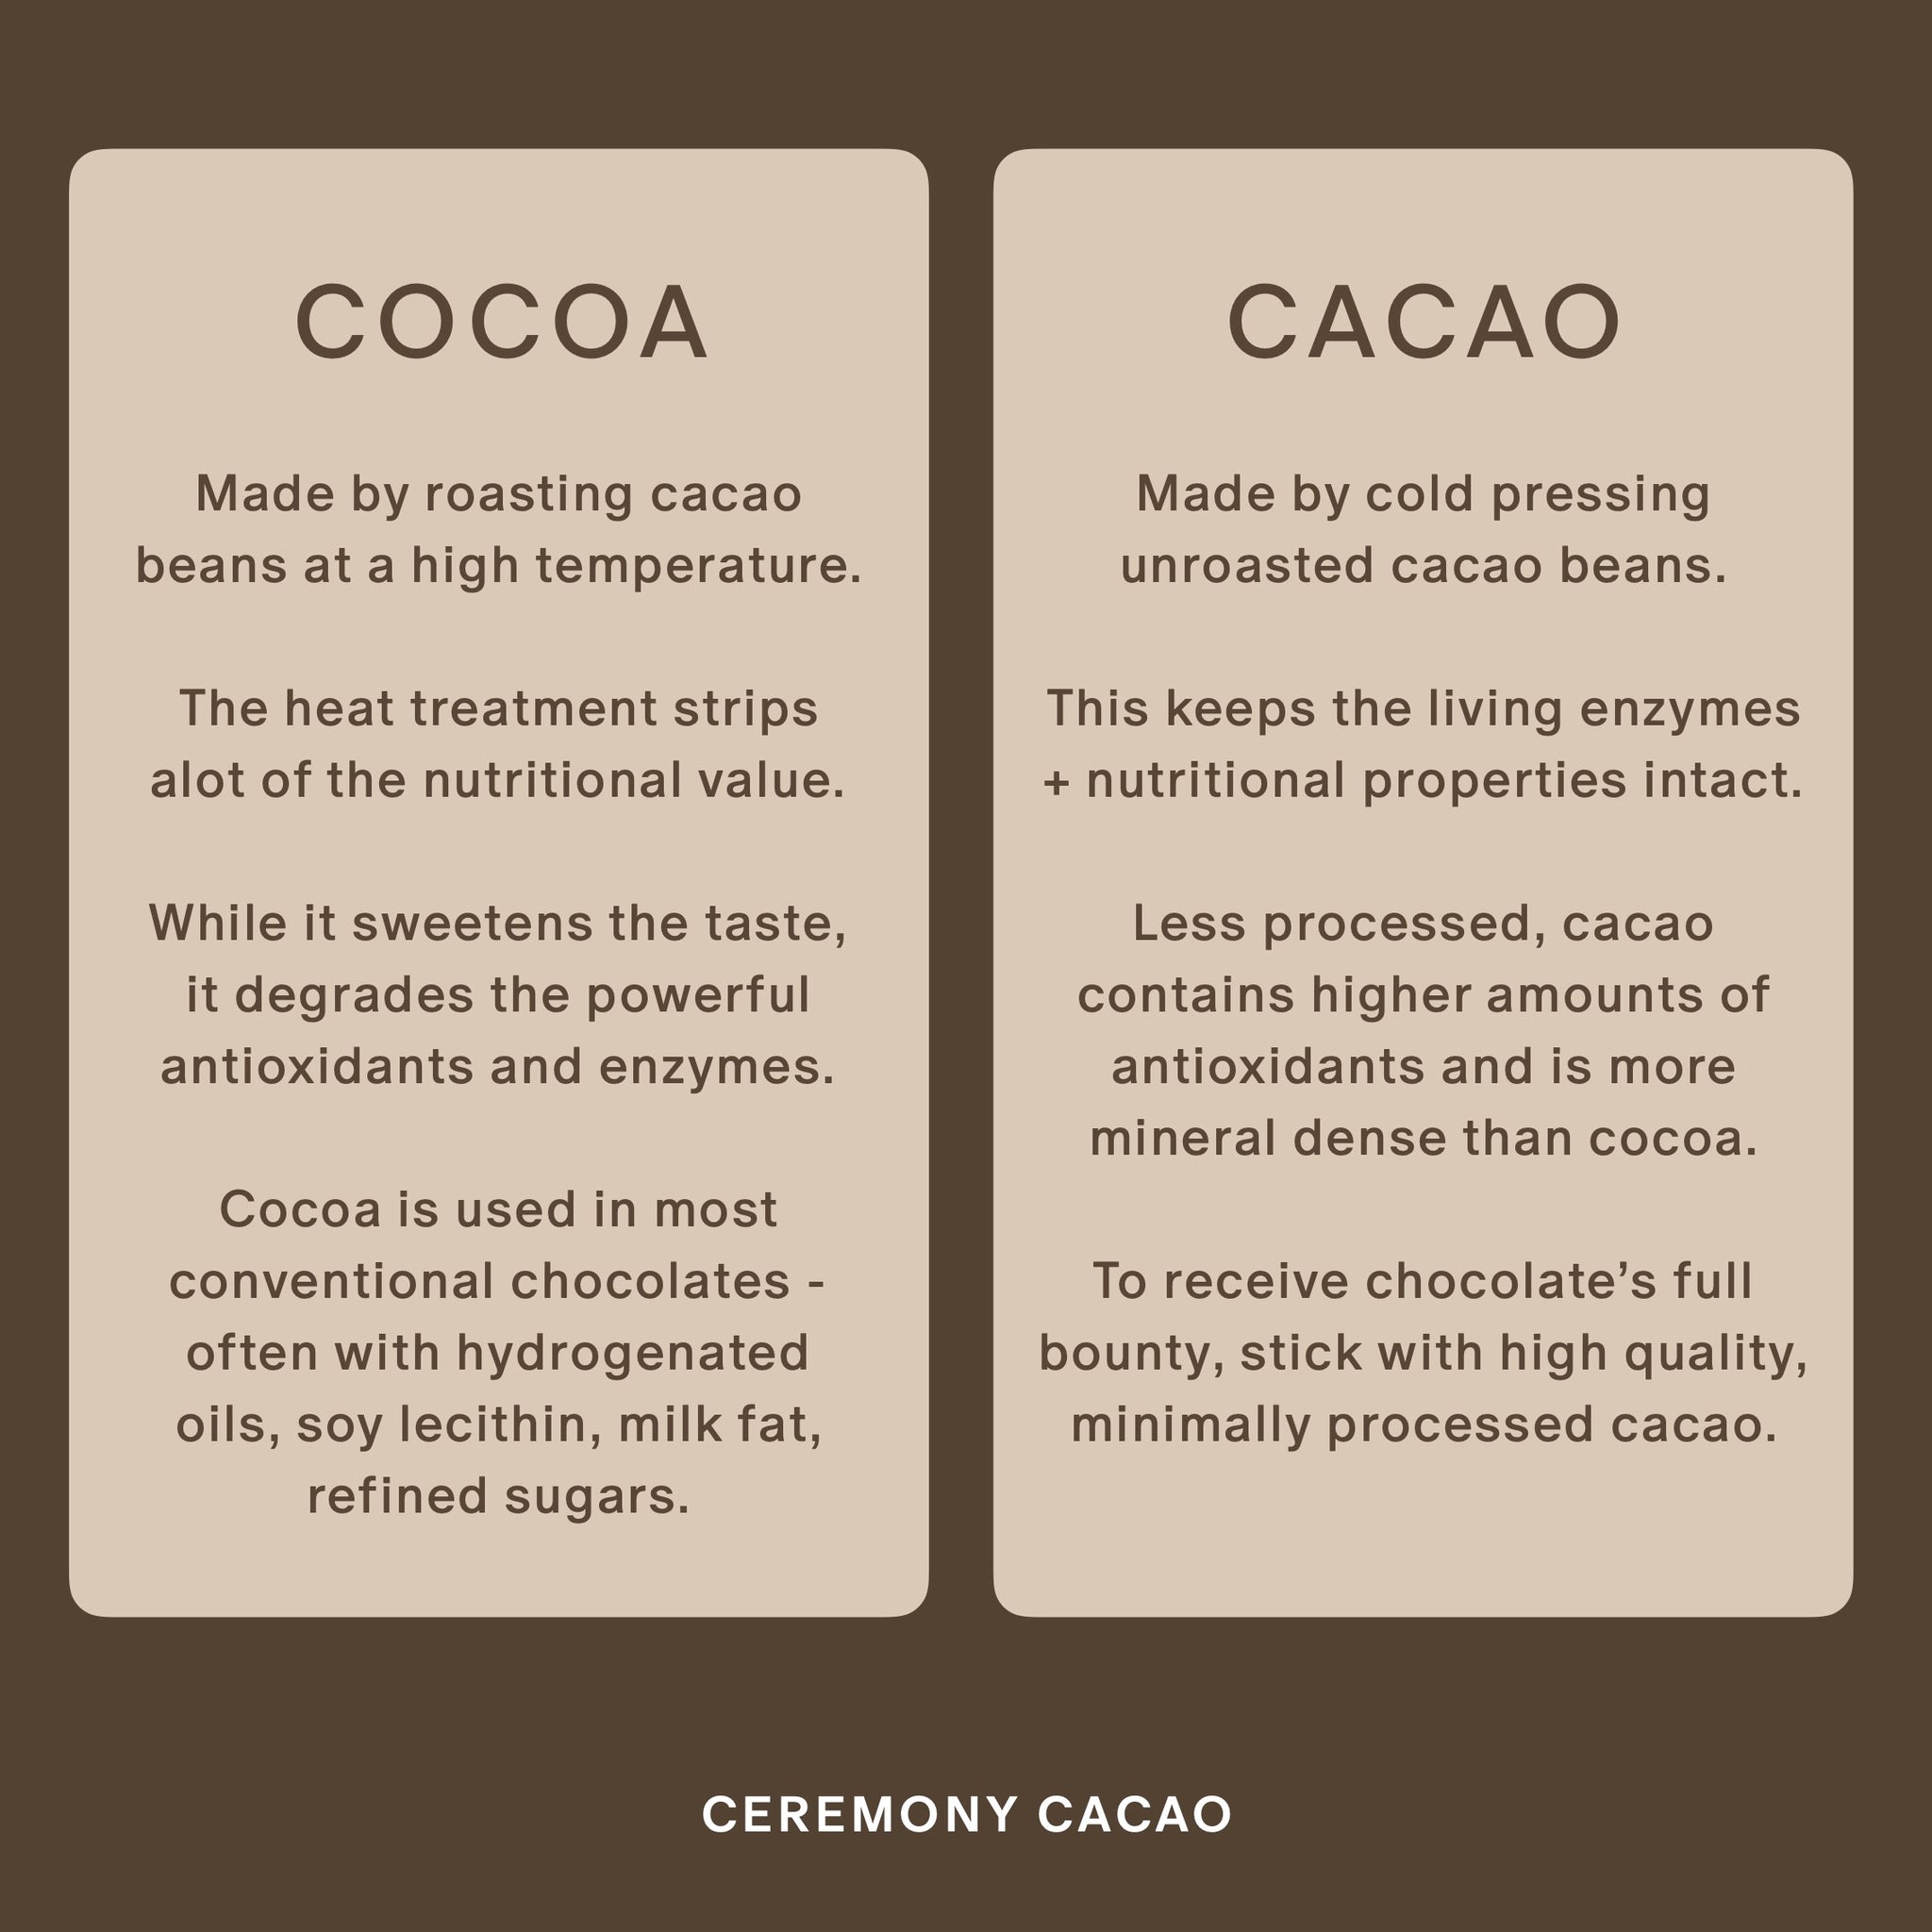 cacao vs cocoa: what's the difference?